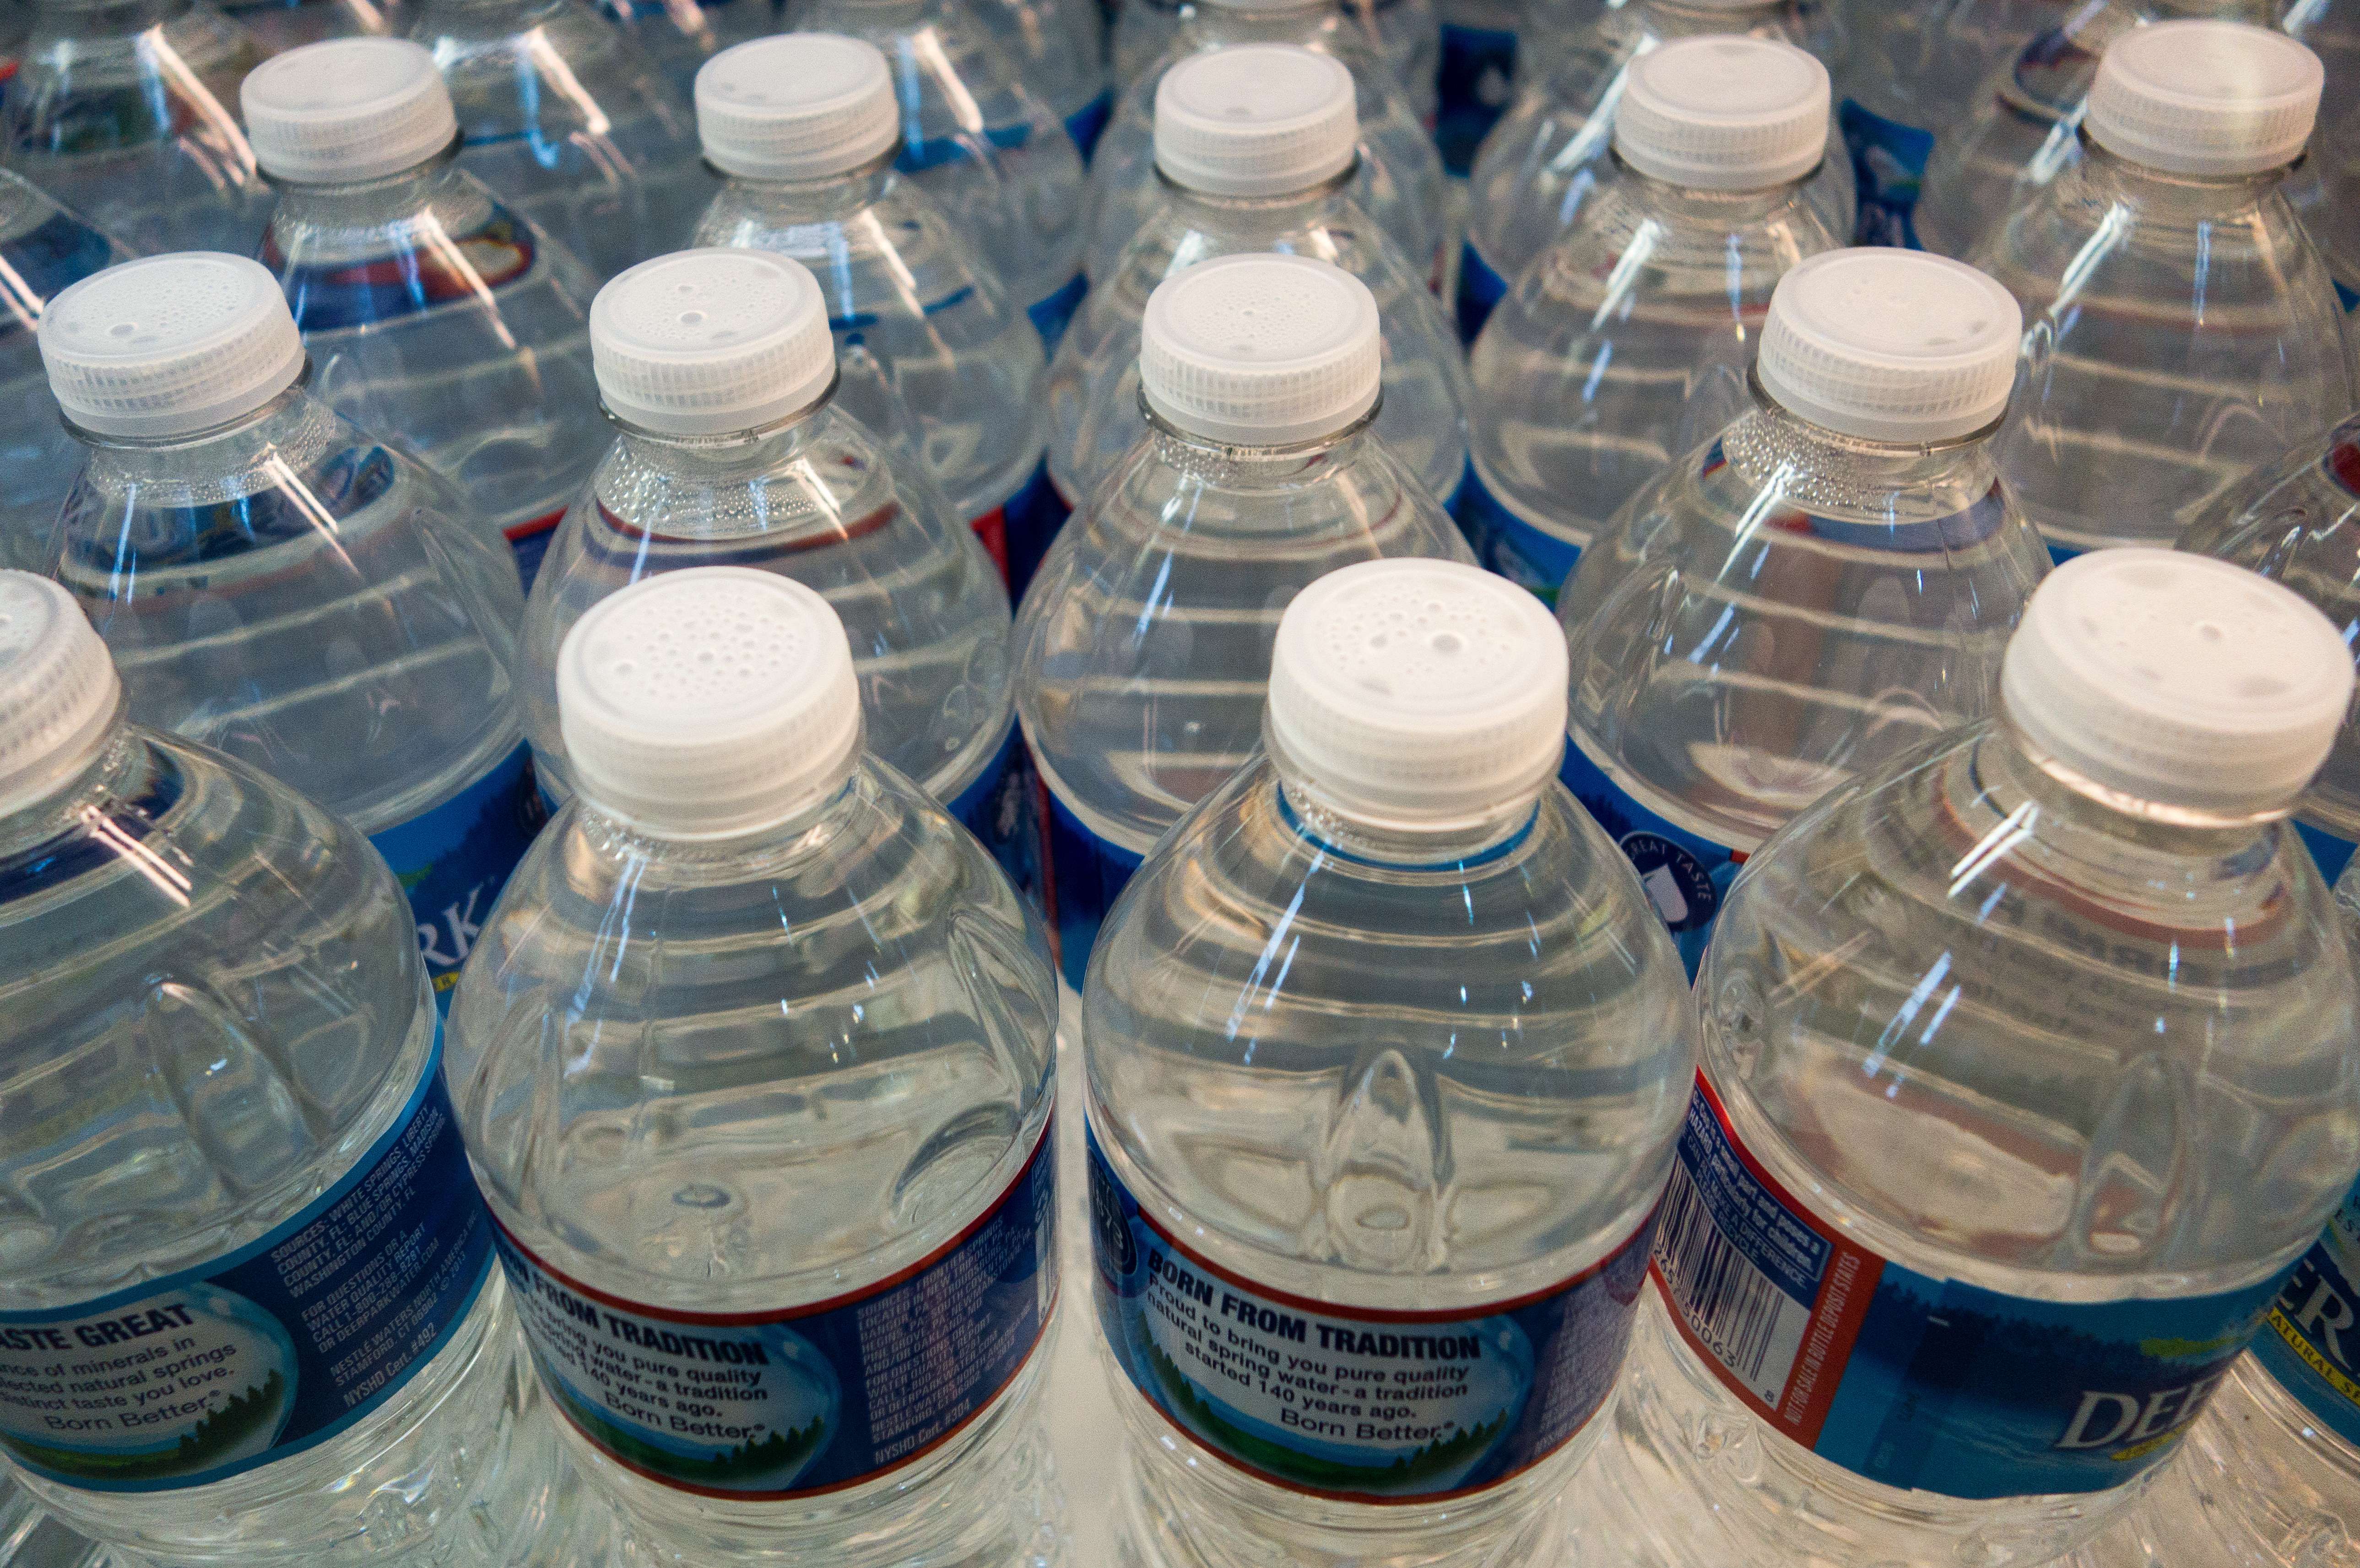 https://hips.hearstapps.com/hmg-prod/images/bottles-of-water-for-sale-are-seen-at-the-eastern-market-news-photo-474887195-1565367085.jpg